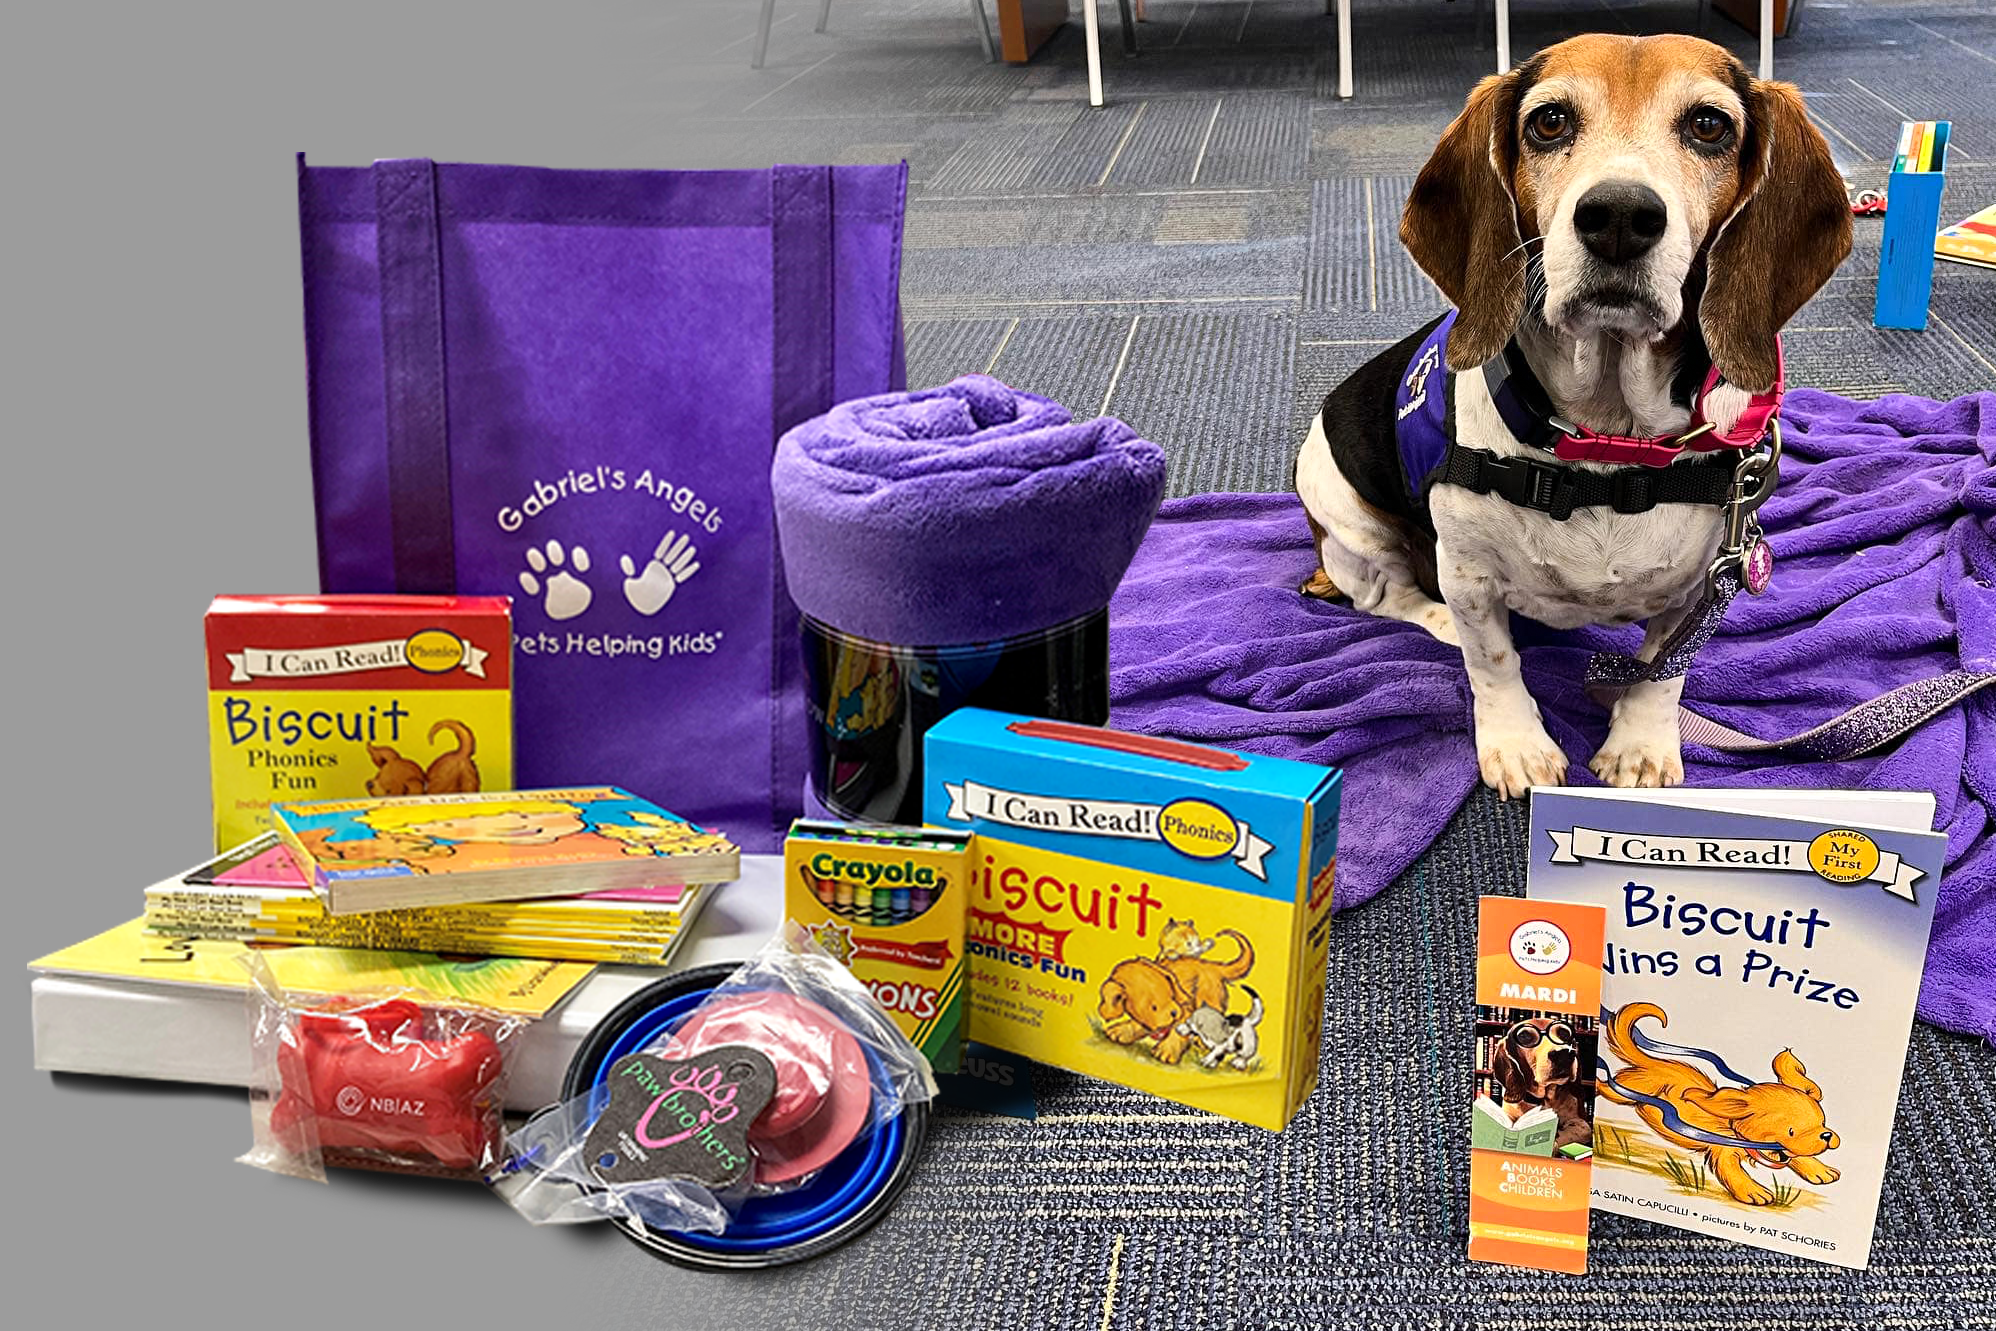 Mardi, the therapy dog with an activity kit.